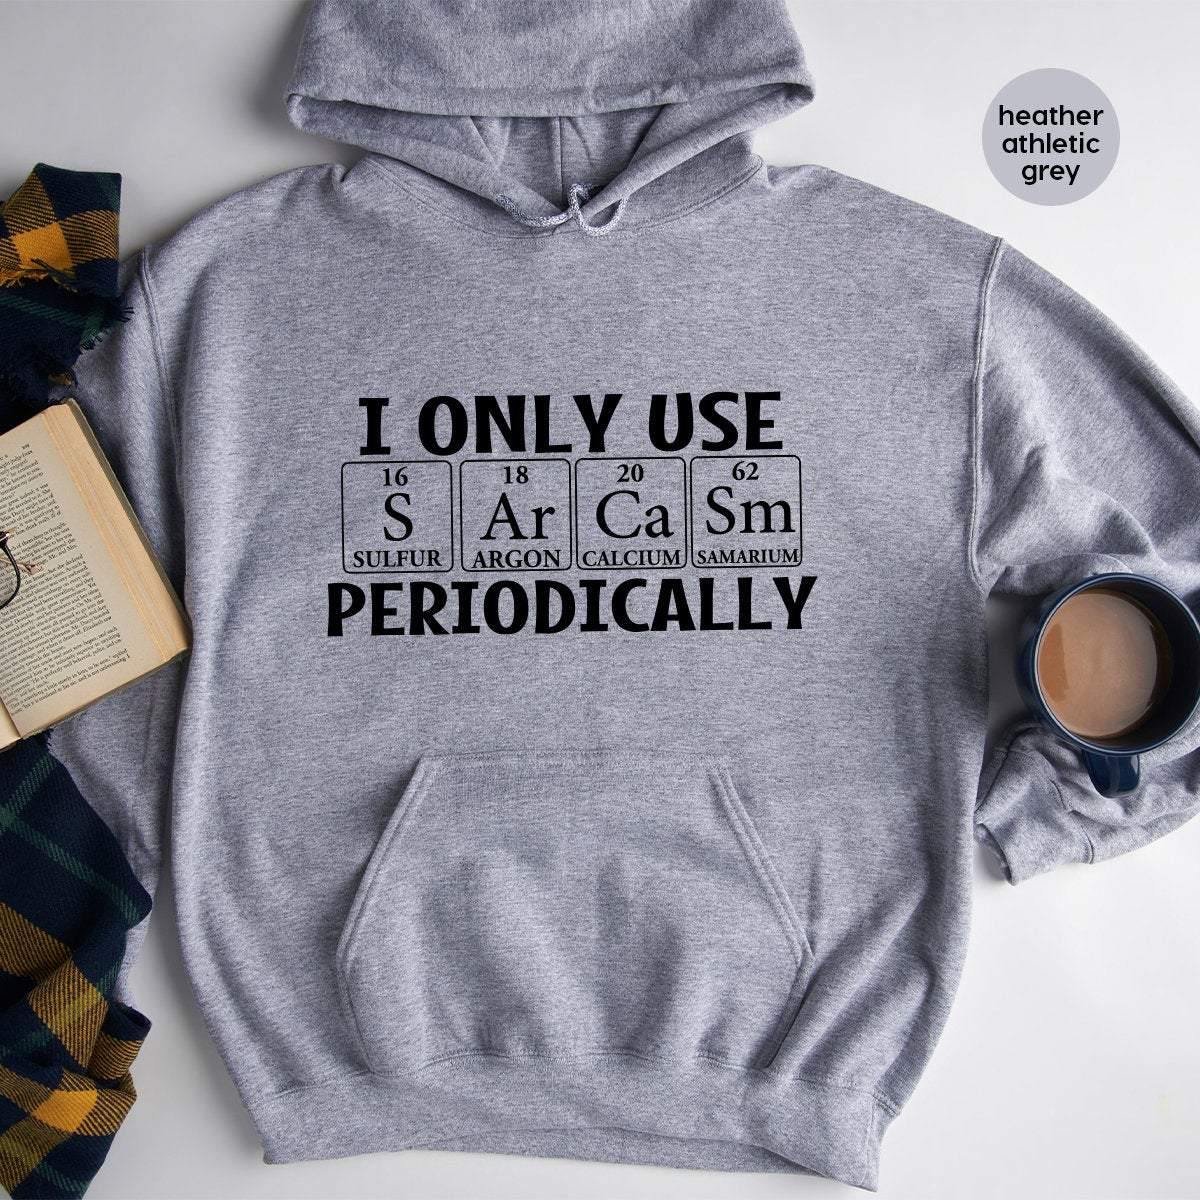 Sarcastic Hoodie, I Only Use Sarcasm Periodically Hoodie, Funny Chemistry Hoodie, Funny Science Hoodie, Sarcastic Chemistry Hoodie - Fastdeliverytees.com